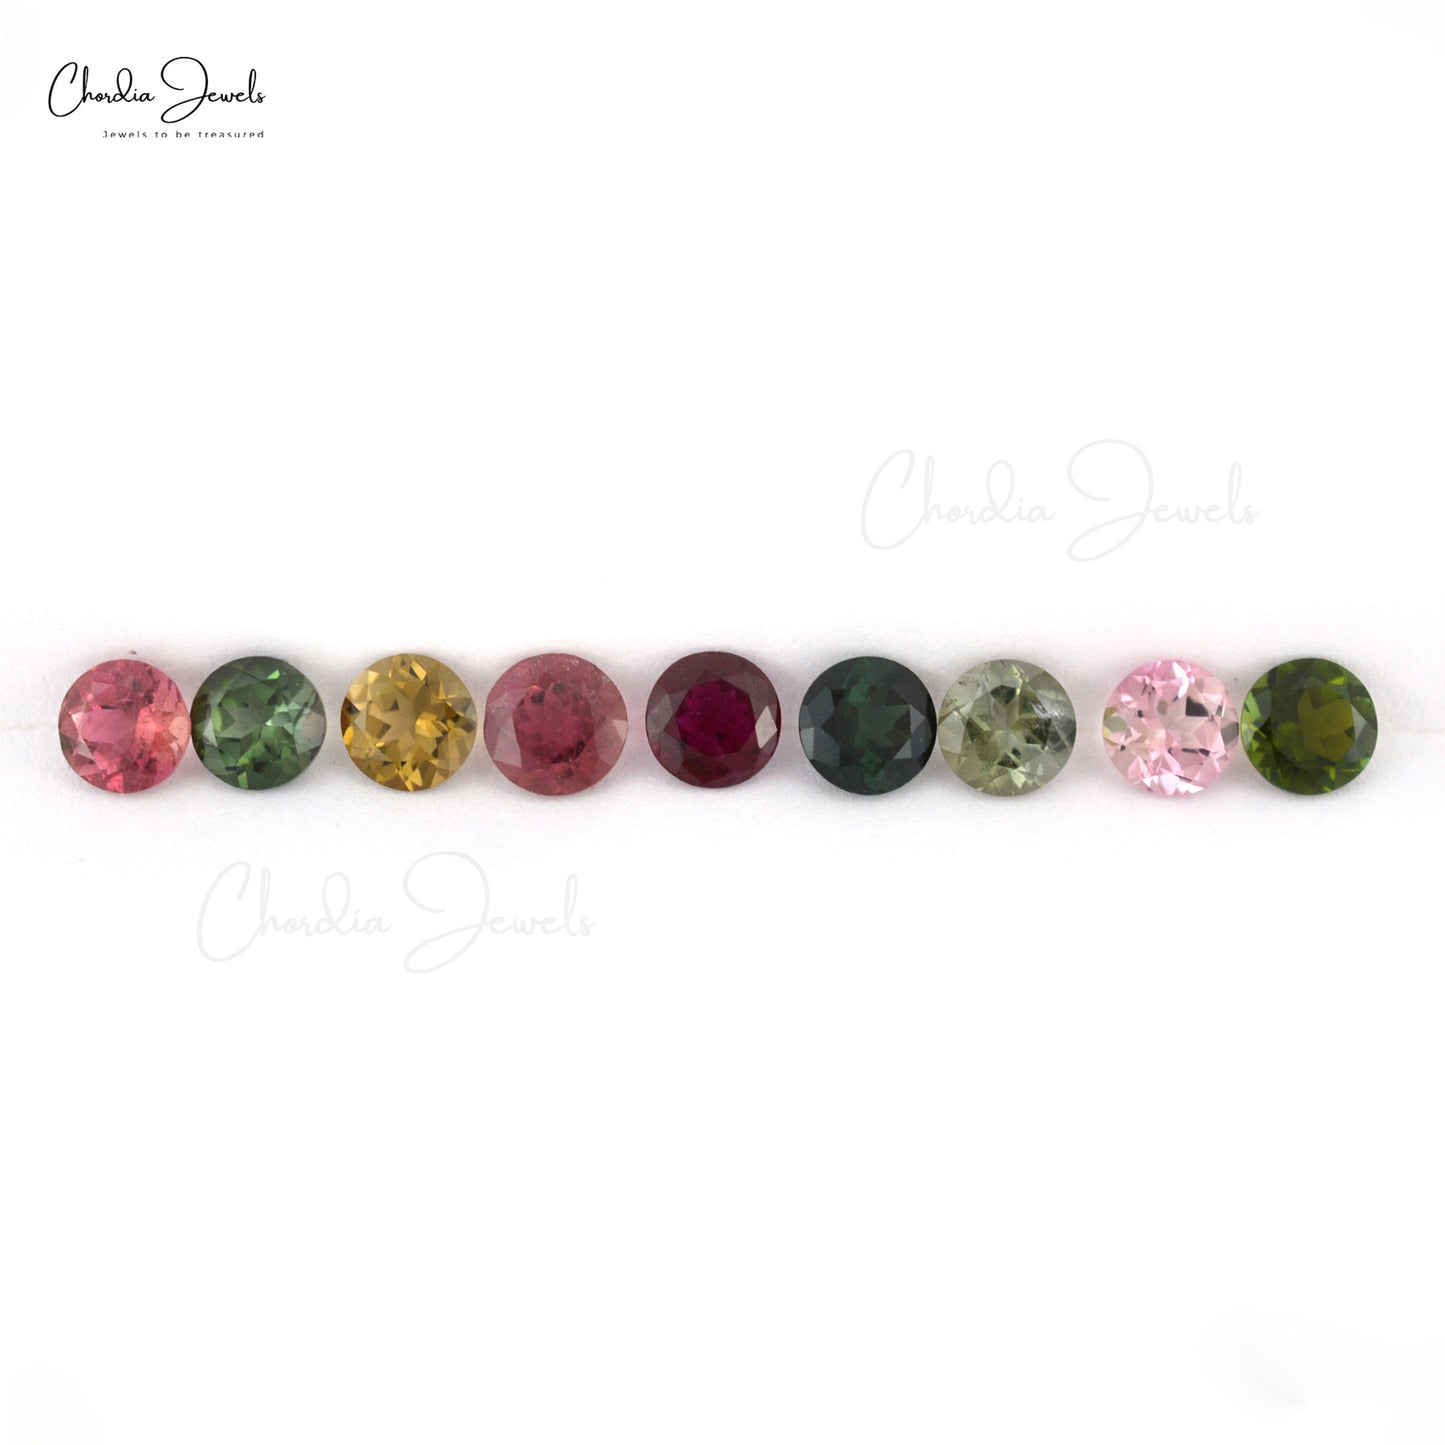 Load image into Gallery viewer, 1 Carat Size Top Grade Multi Tourmaline Round Cut For Earrings, 1 Piece
